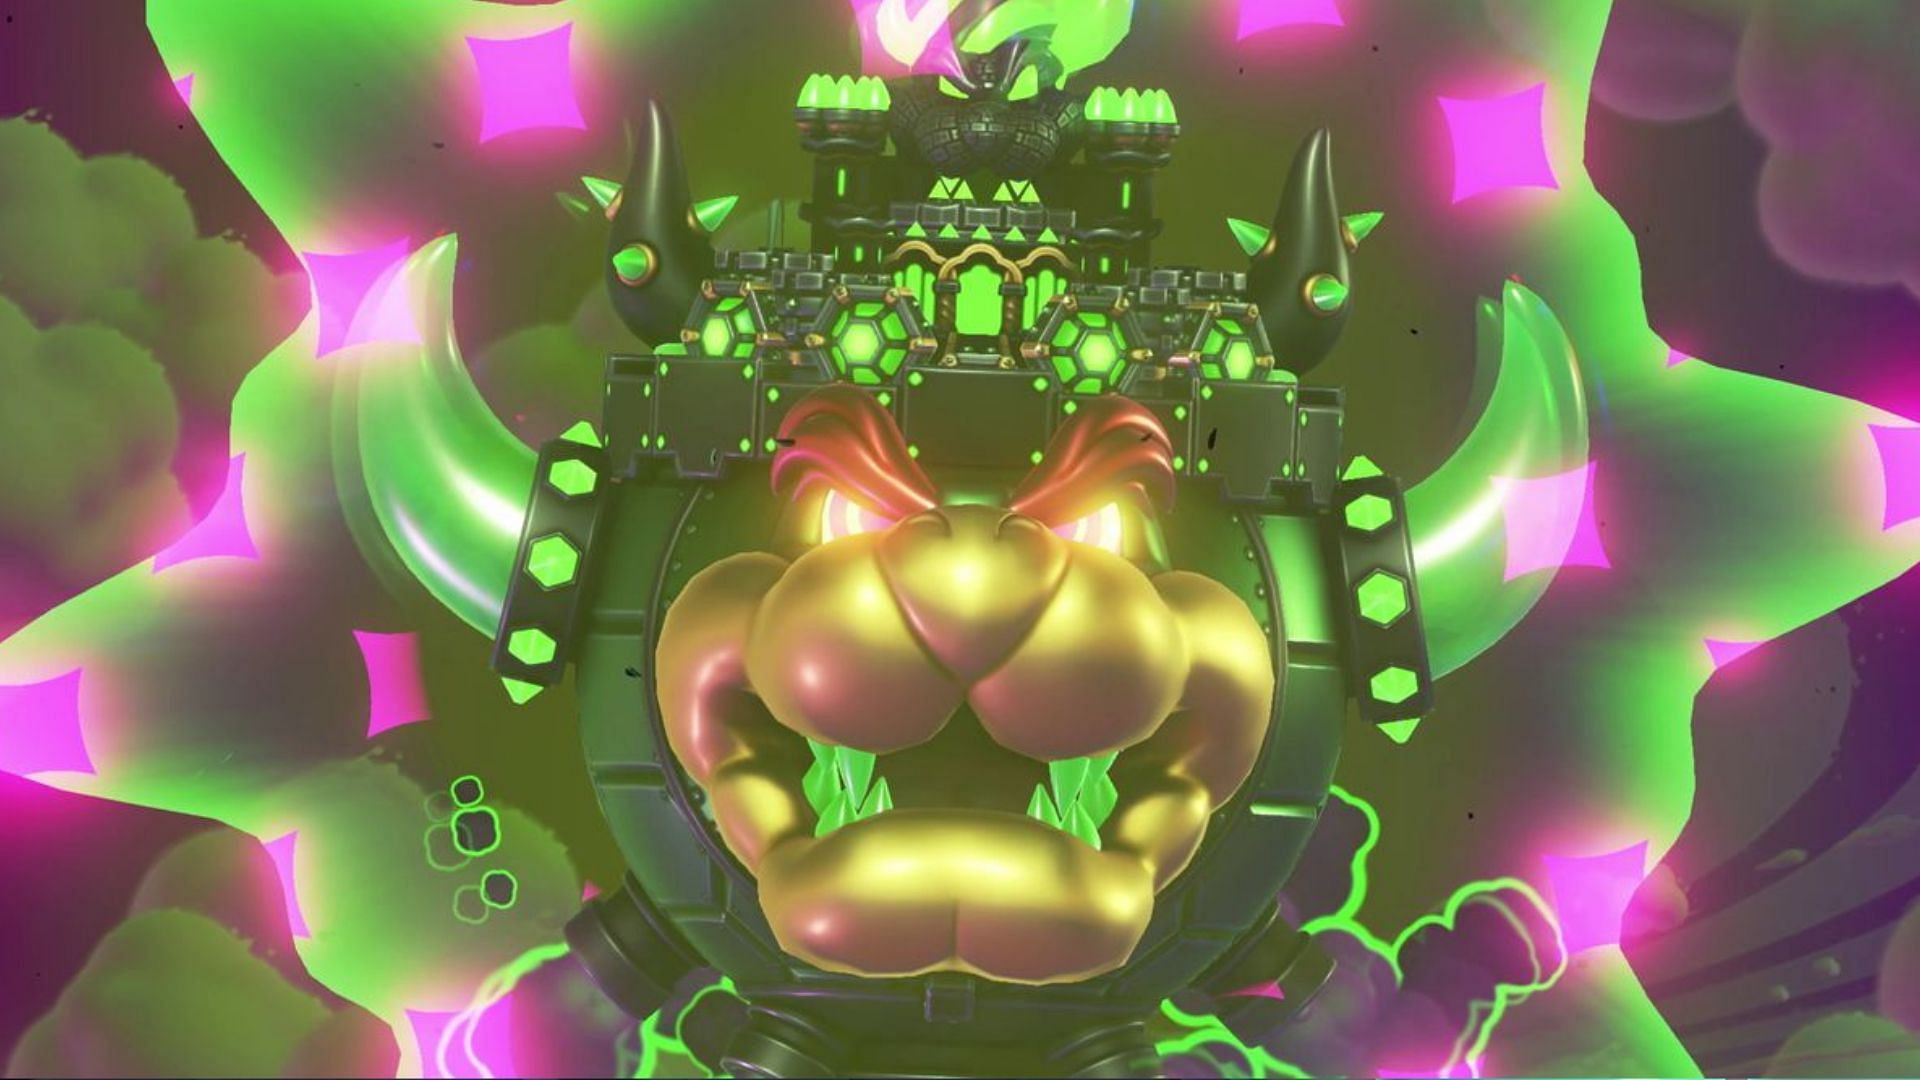 This version of Bowser is terrifying (Image via Nintendo)